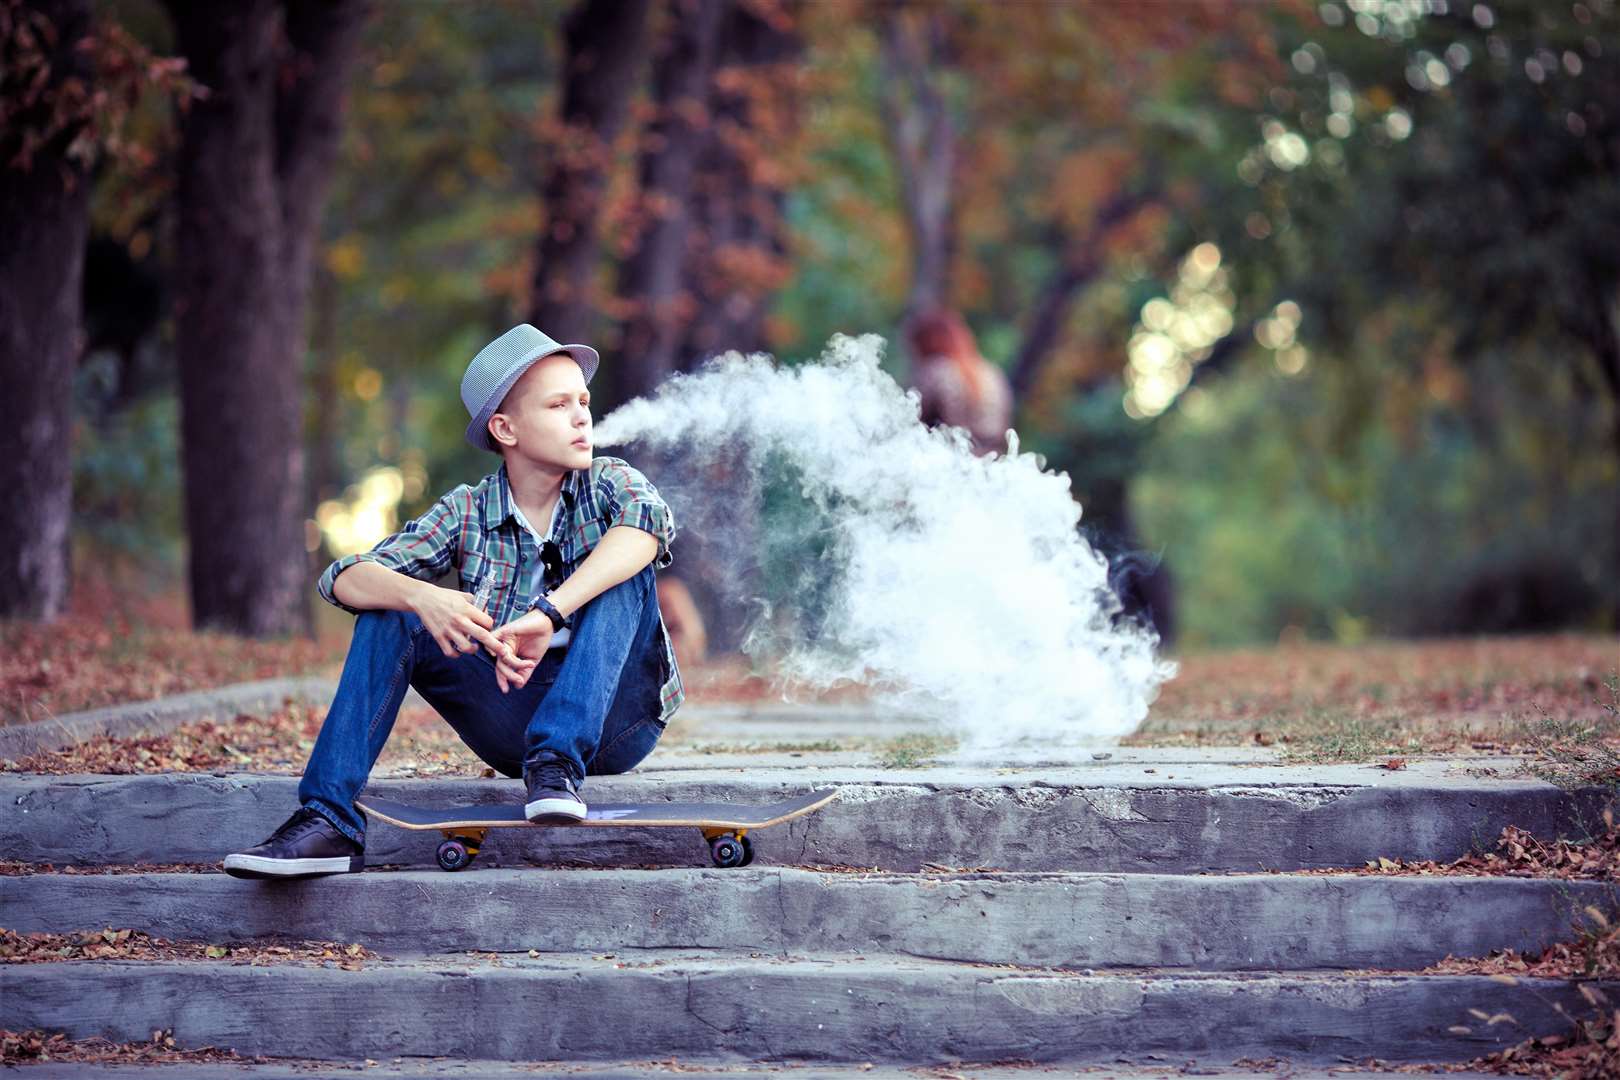 ASH Scotland says there has been a recent upsurge of youth vaping across Scotland. Picture: AdobeStock